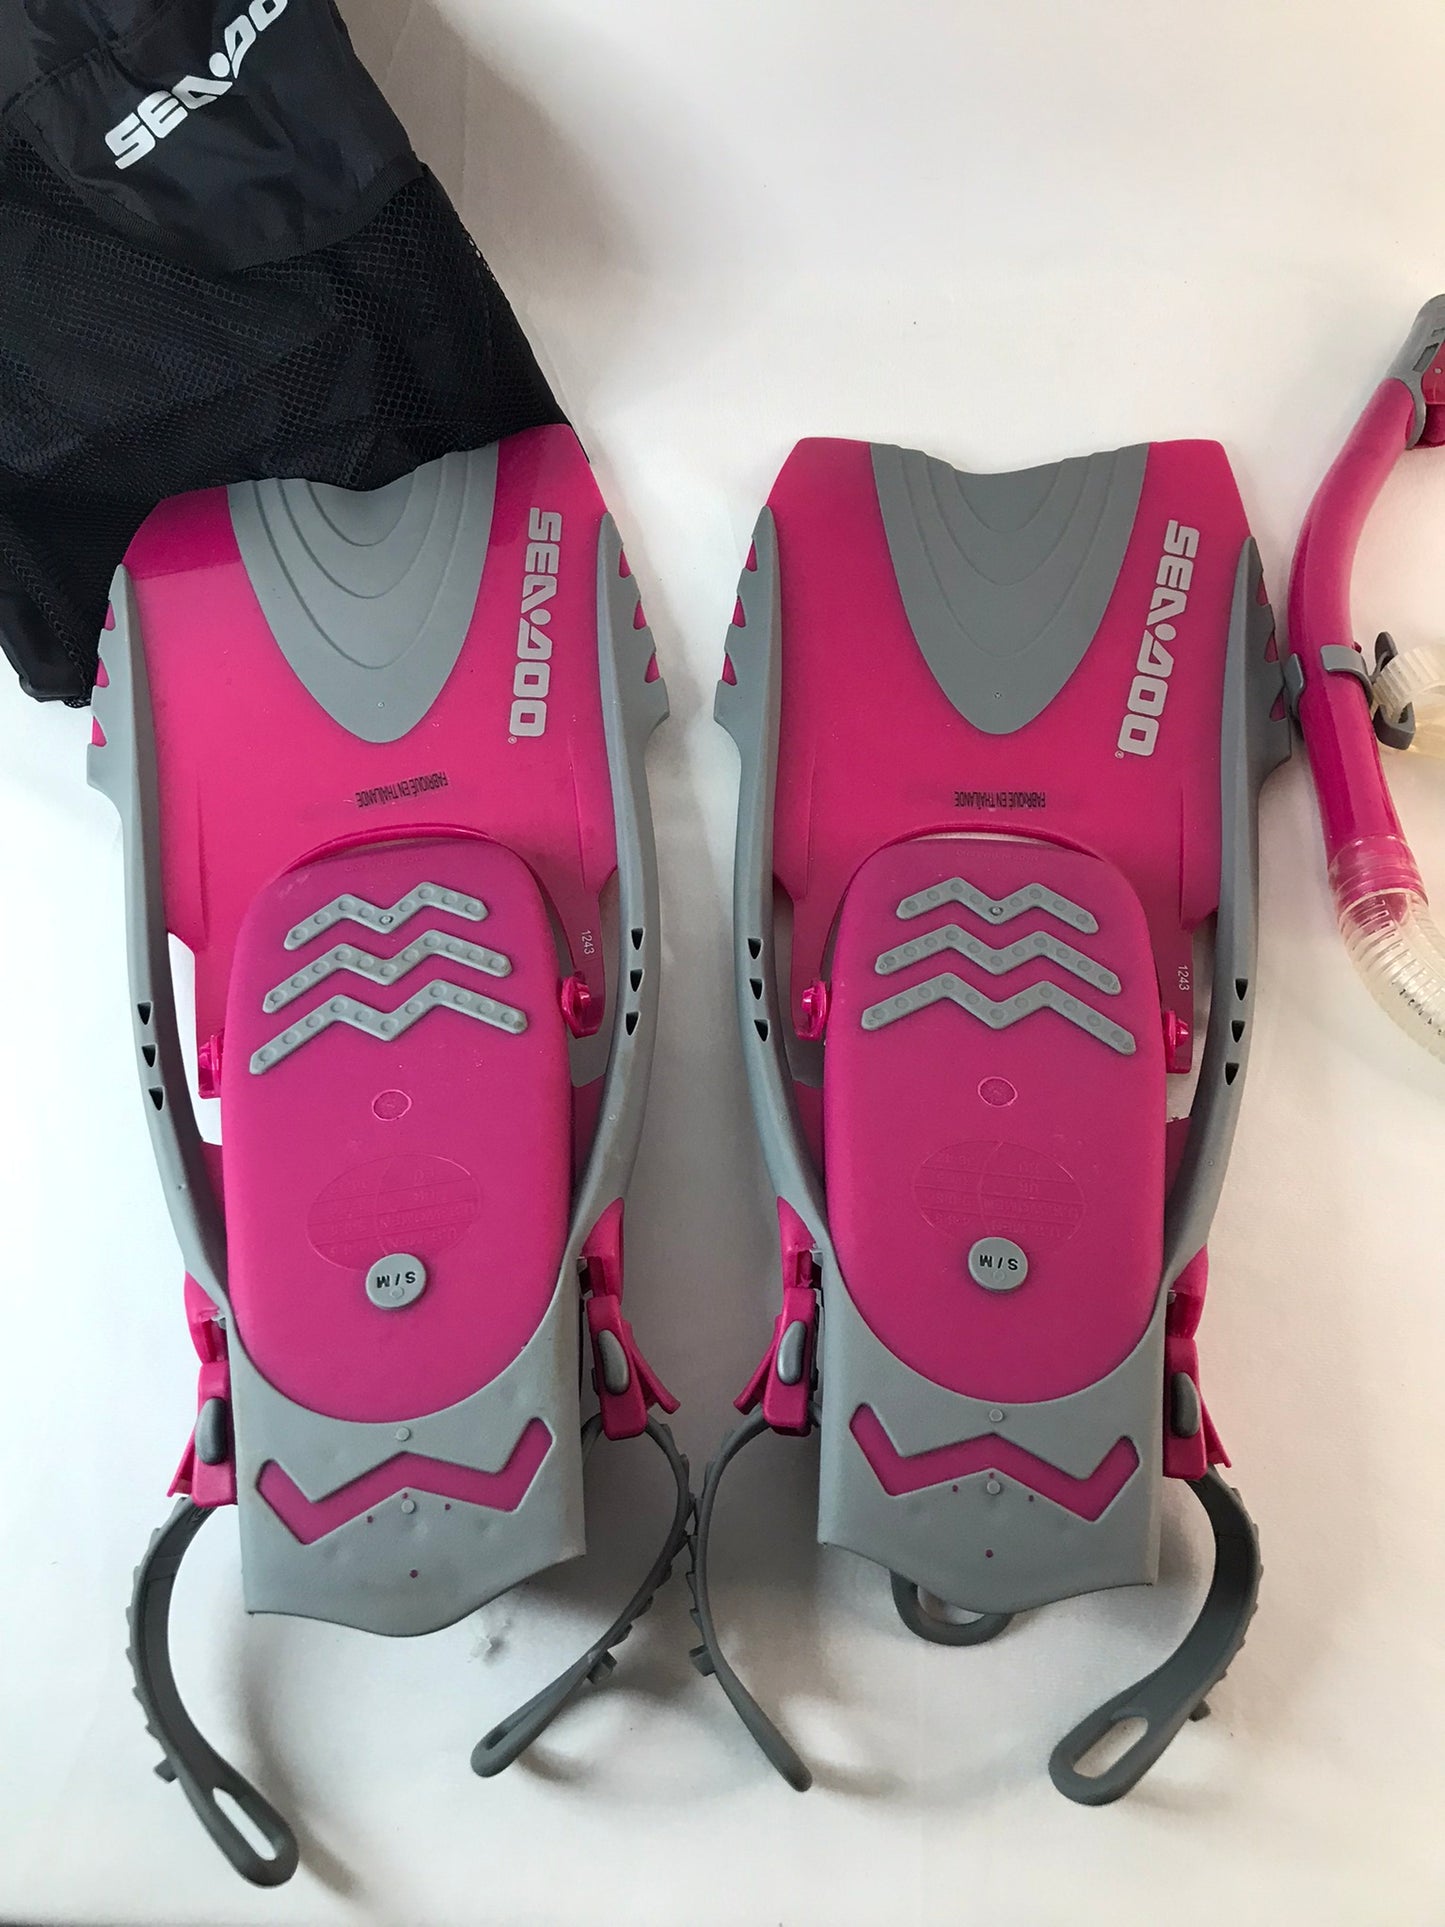 Snorkel Dive Fins Ladies Shoe Size 5-9.5 Sea Doo Raspberry Grey As New Outstanding Quality